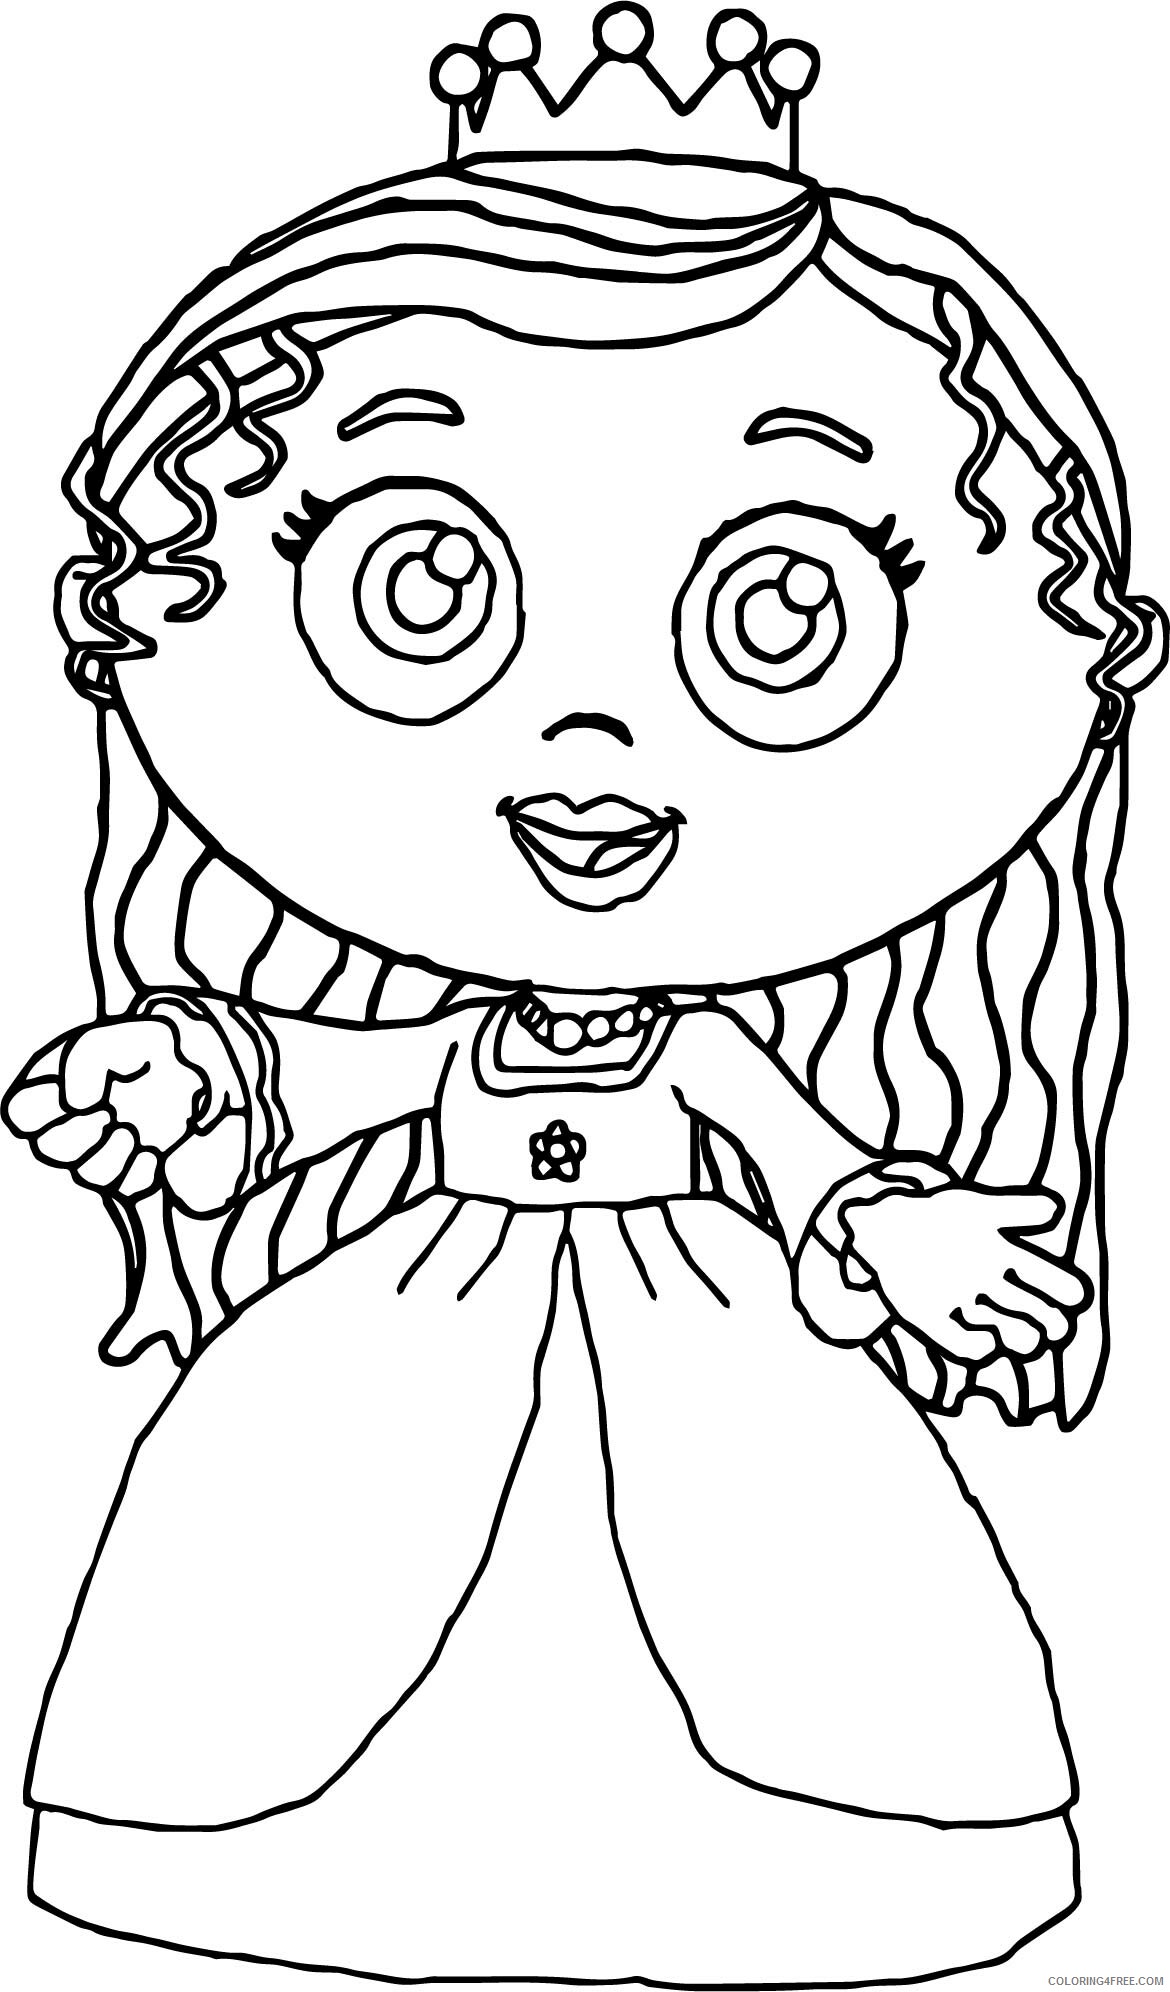 Super Why Coloring Pages TV Film Free Super Why Printable 2020 08303 Coloring4free